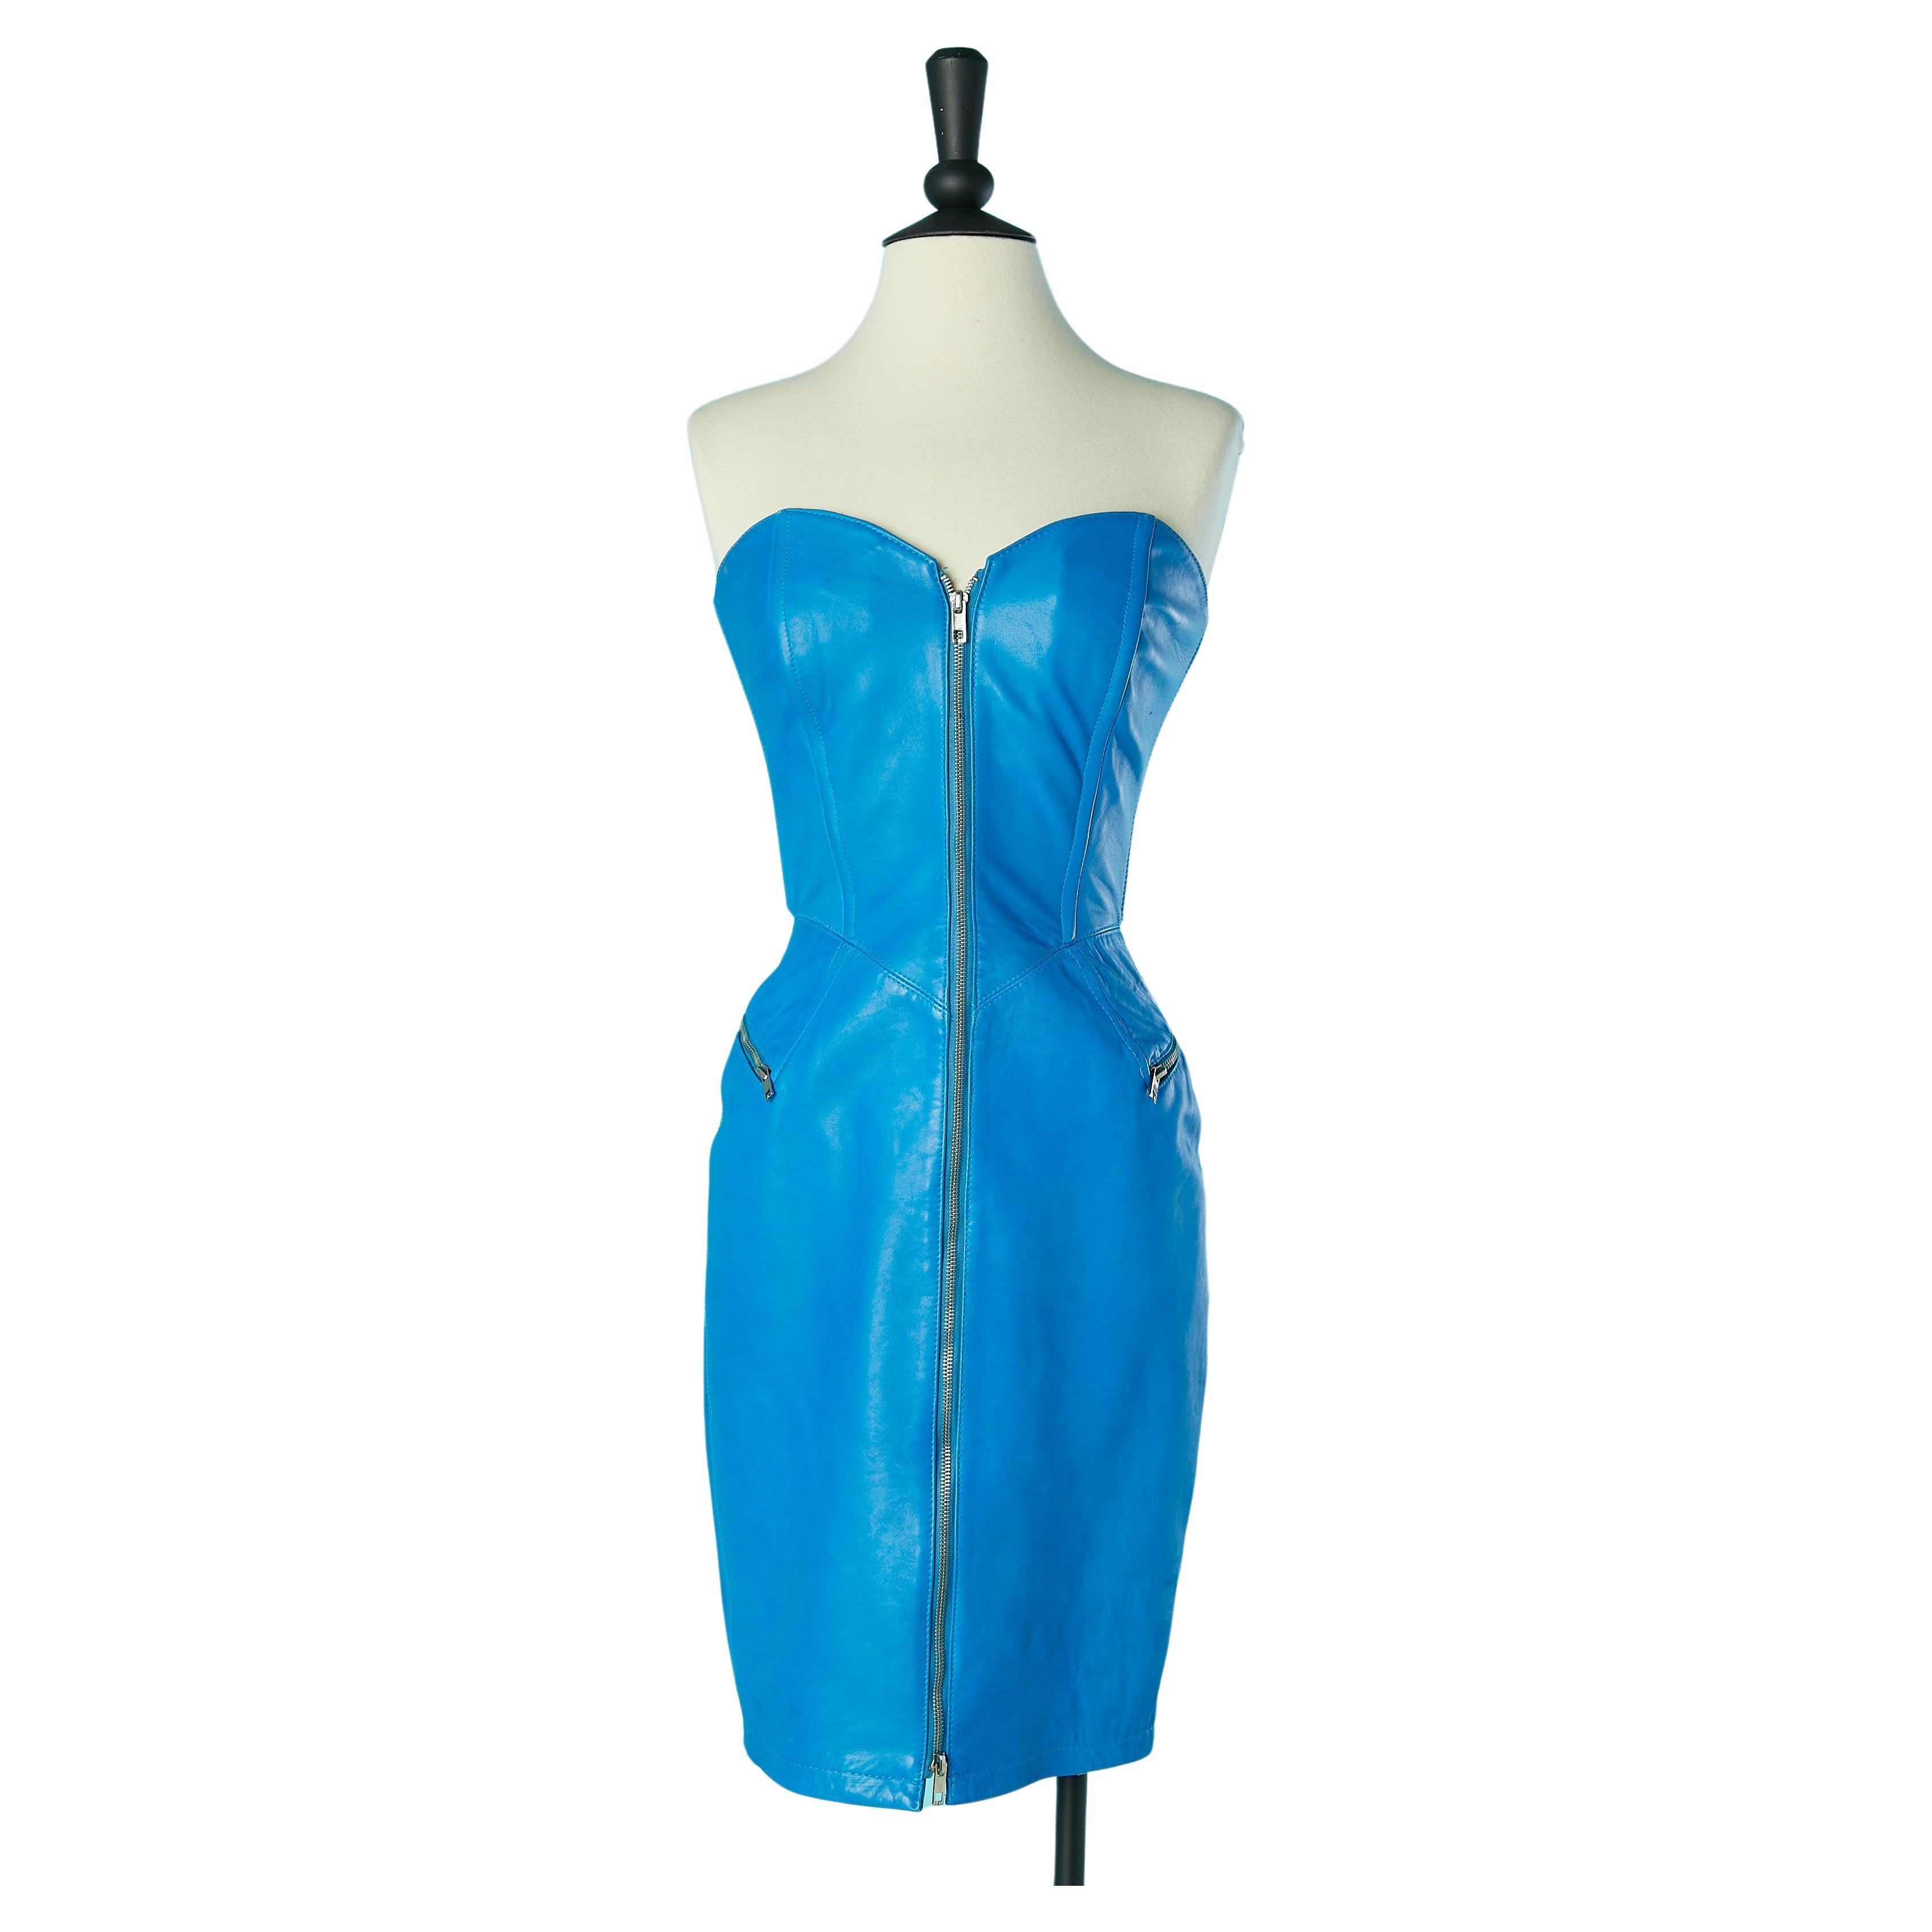 Bright blue leather bustier dress Michael Hoban for North Beach Leather